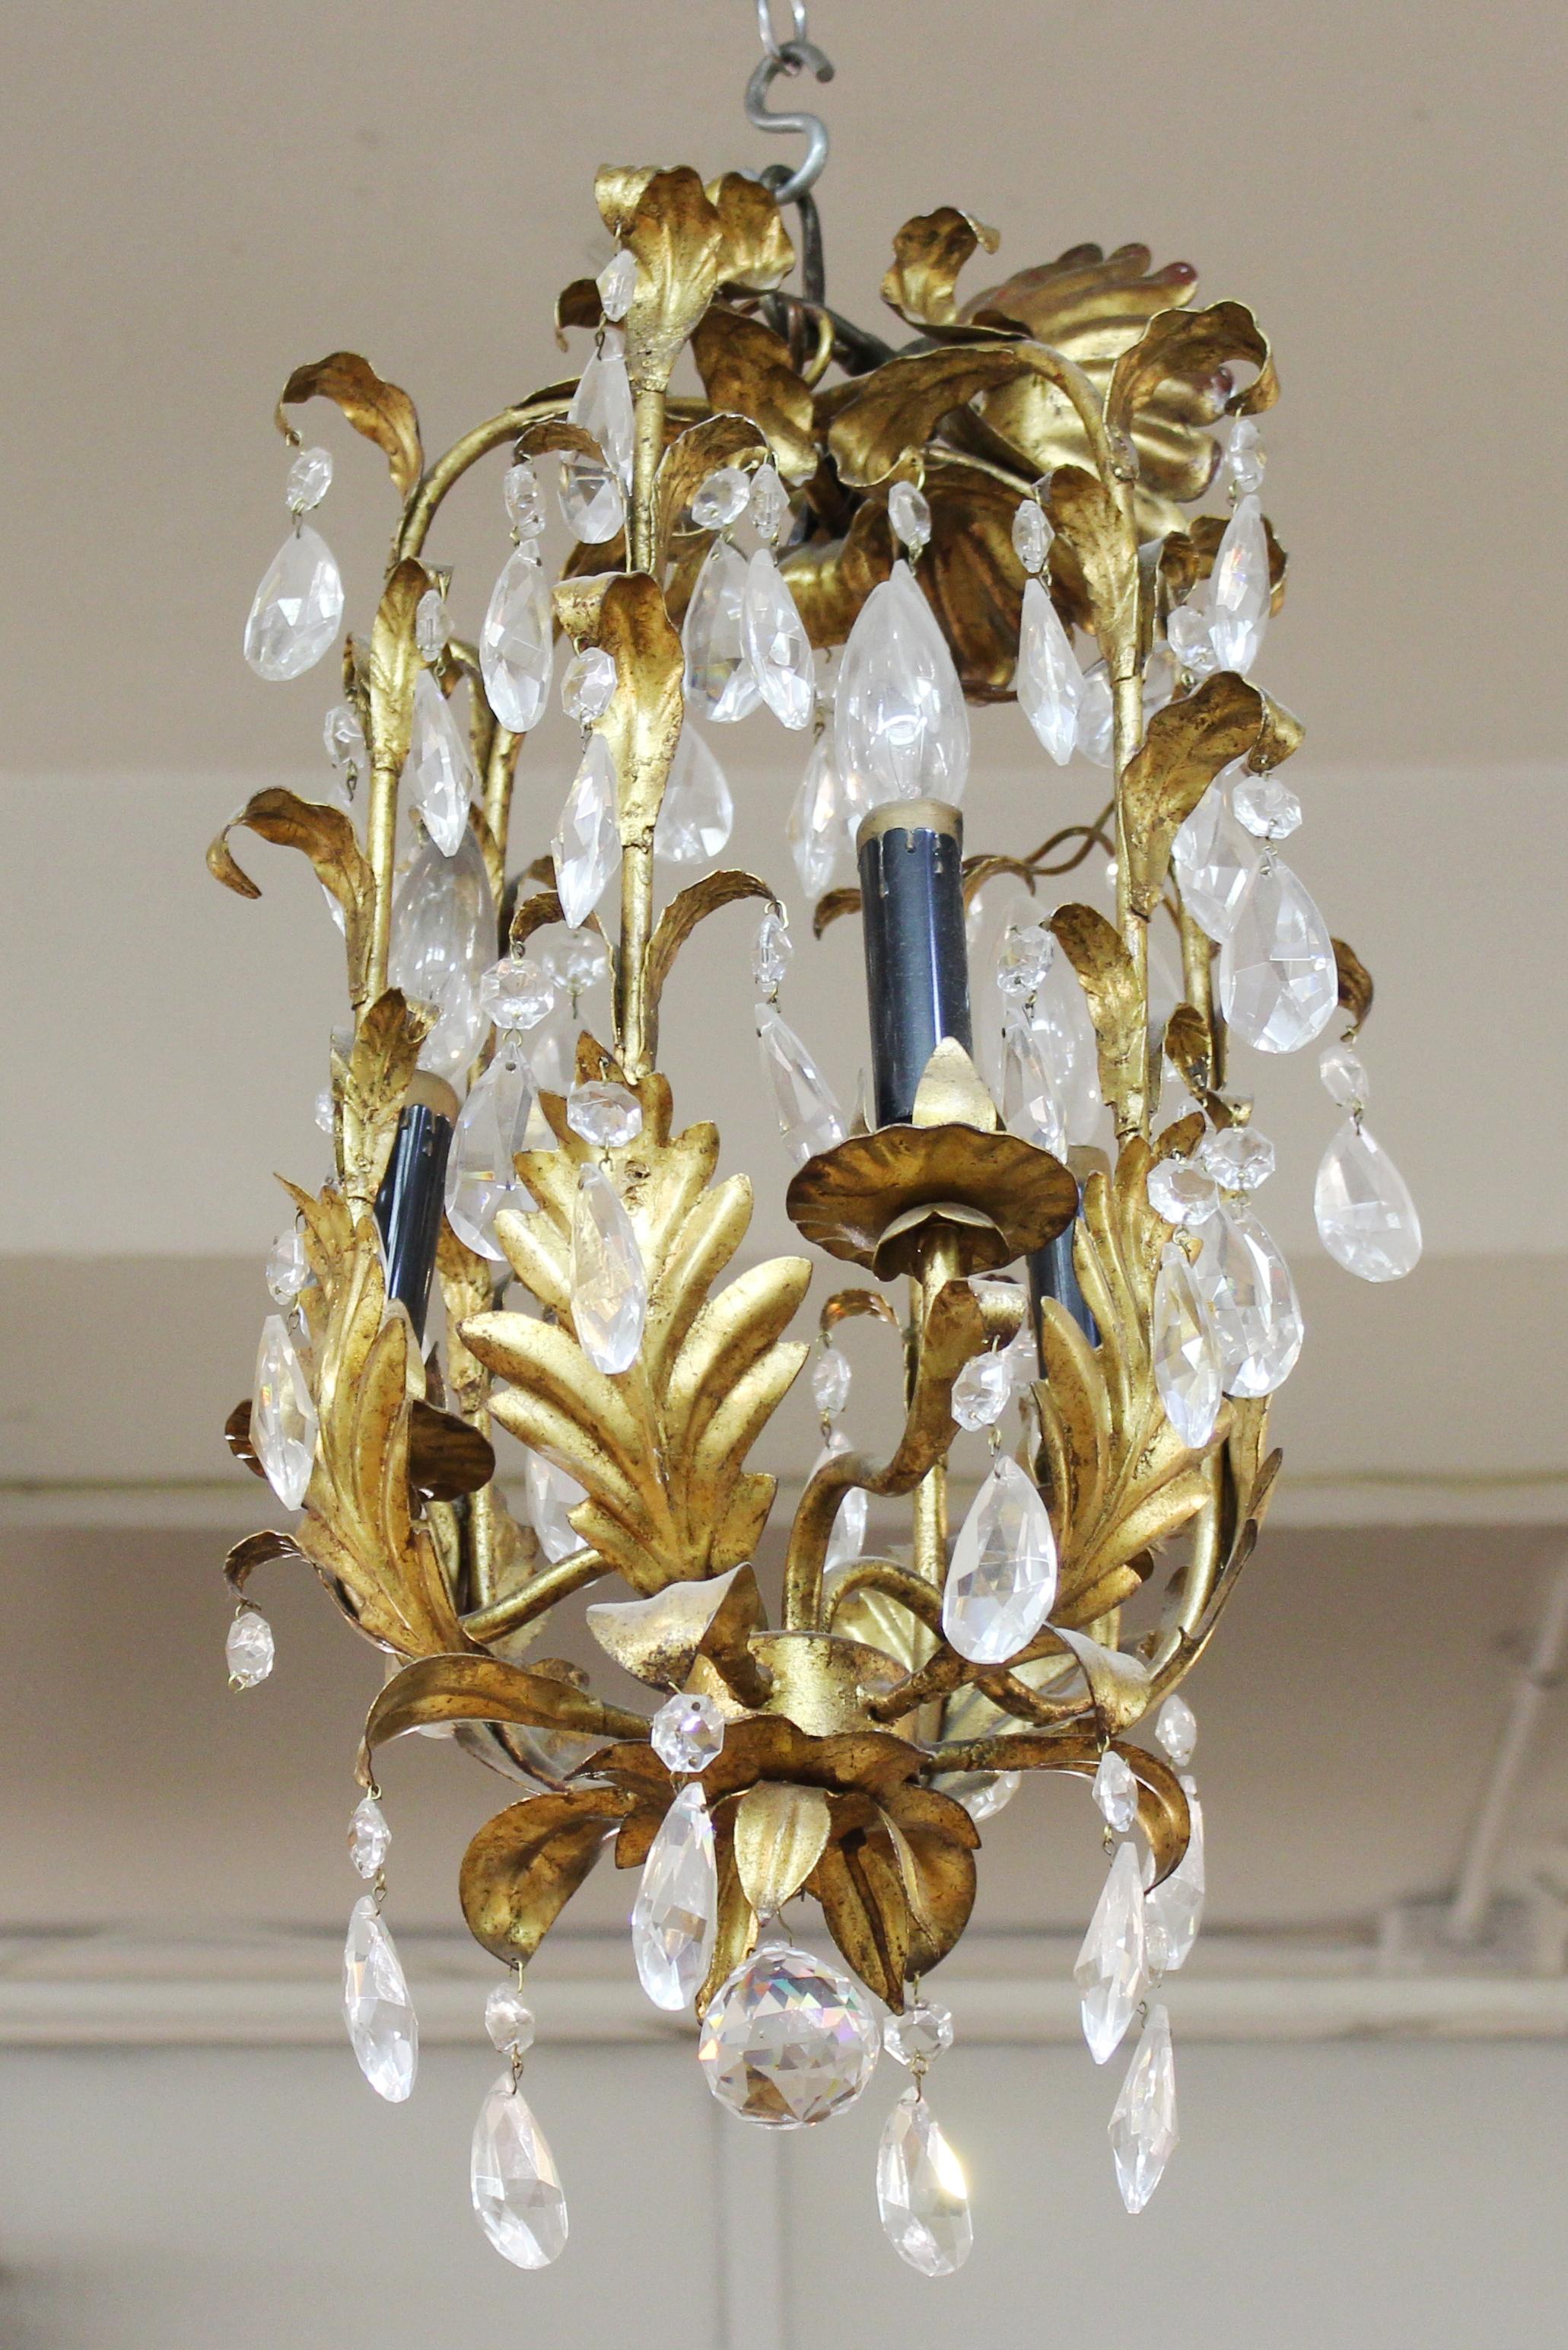 Italian Hollywood Regency style diminutive chandelier with gilt tole foliage elements and crystal droplets.